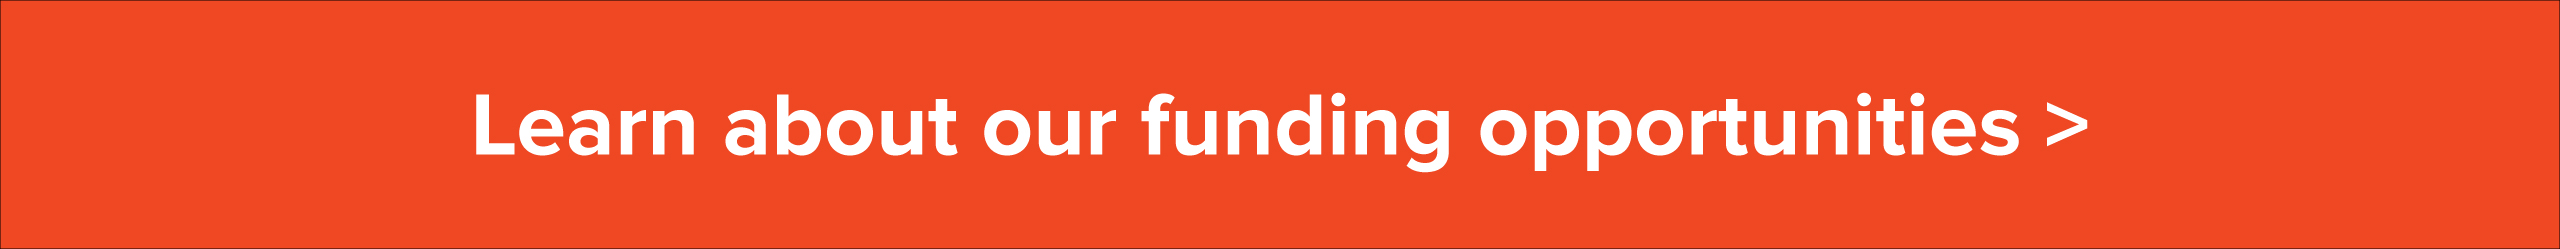 learn about our funding opportunities